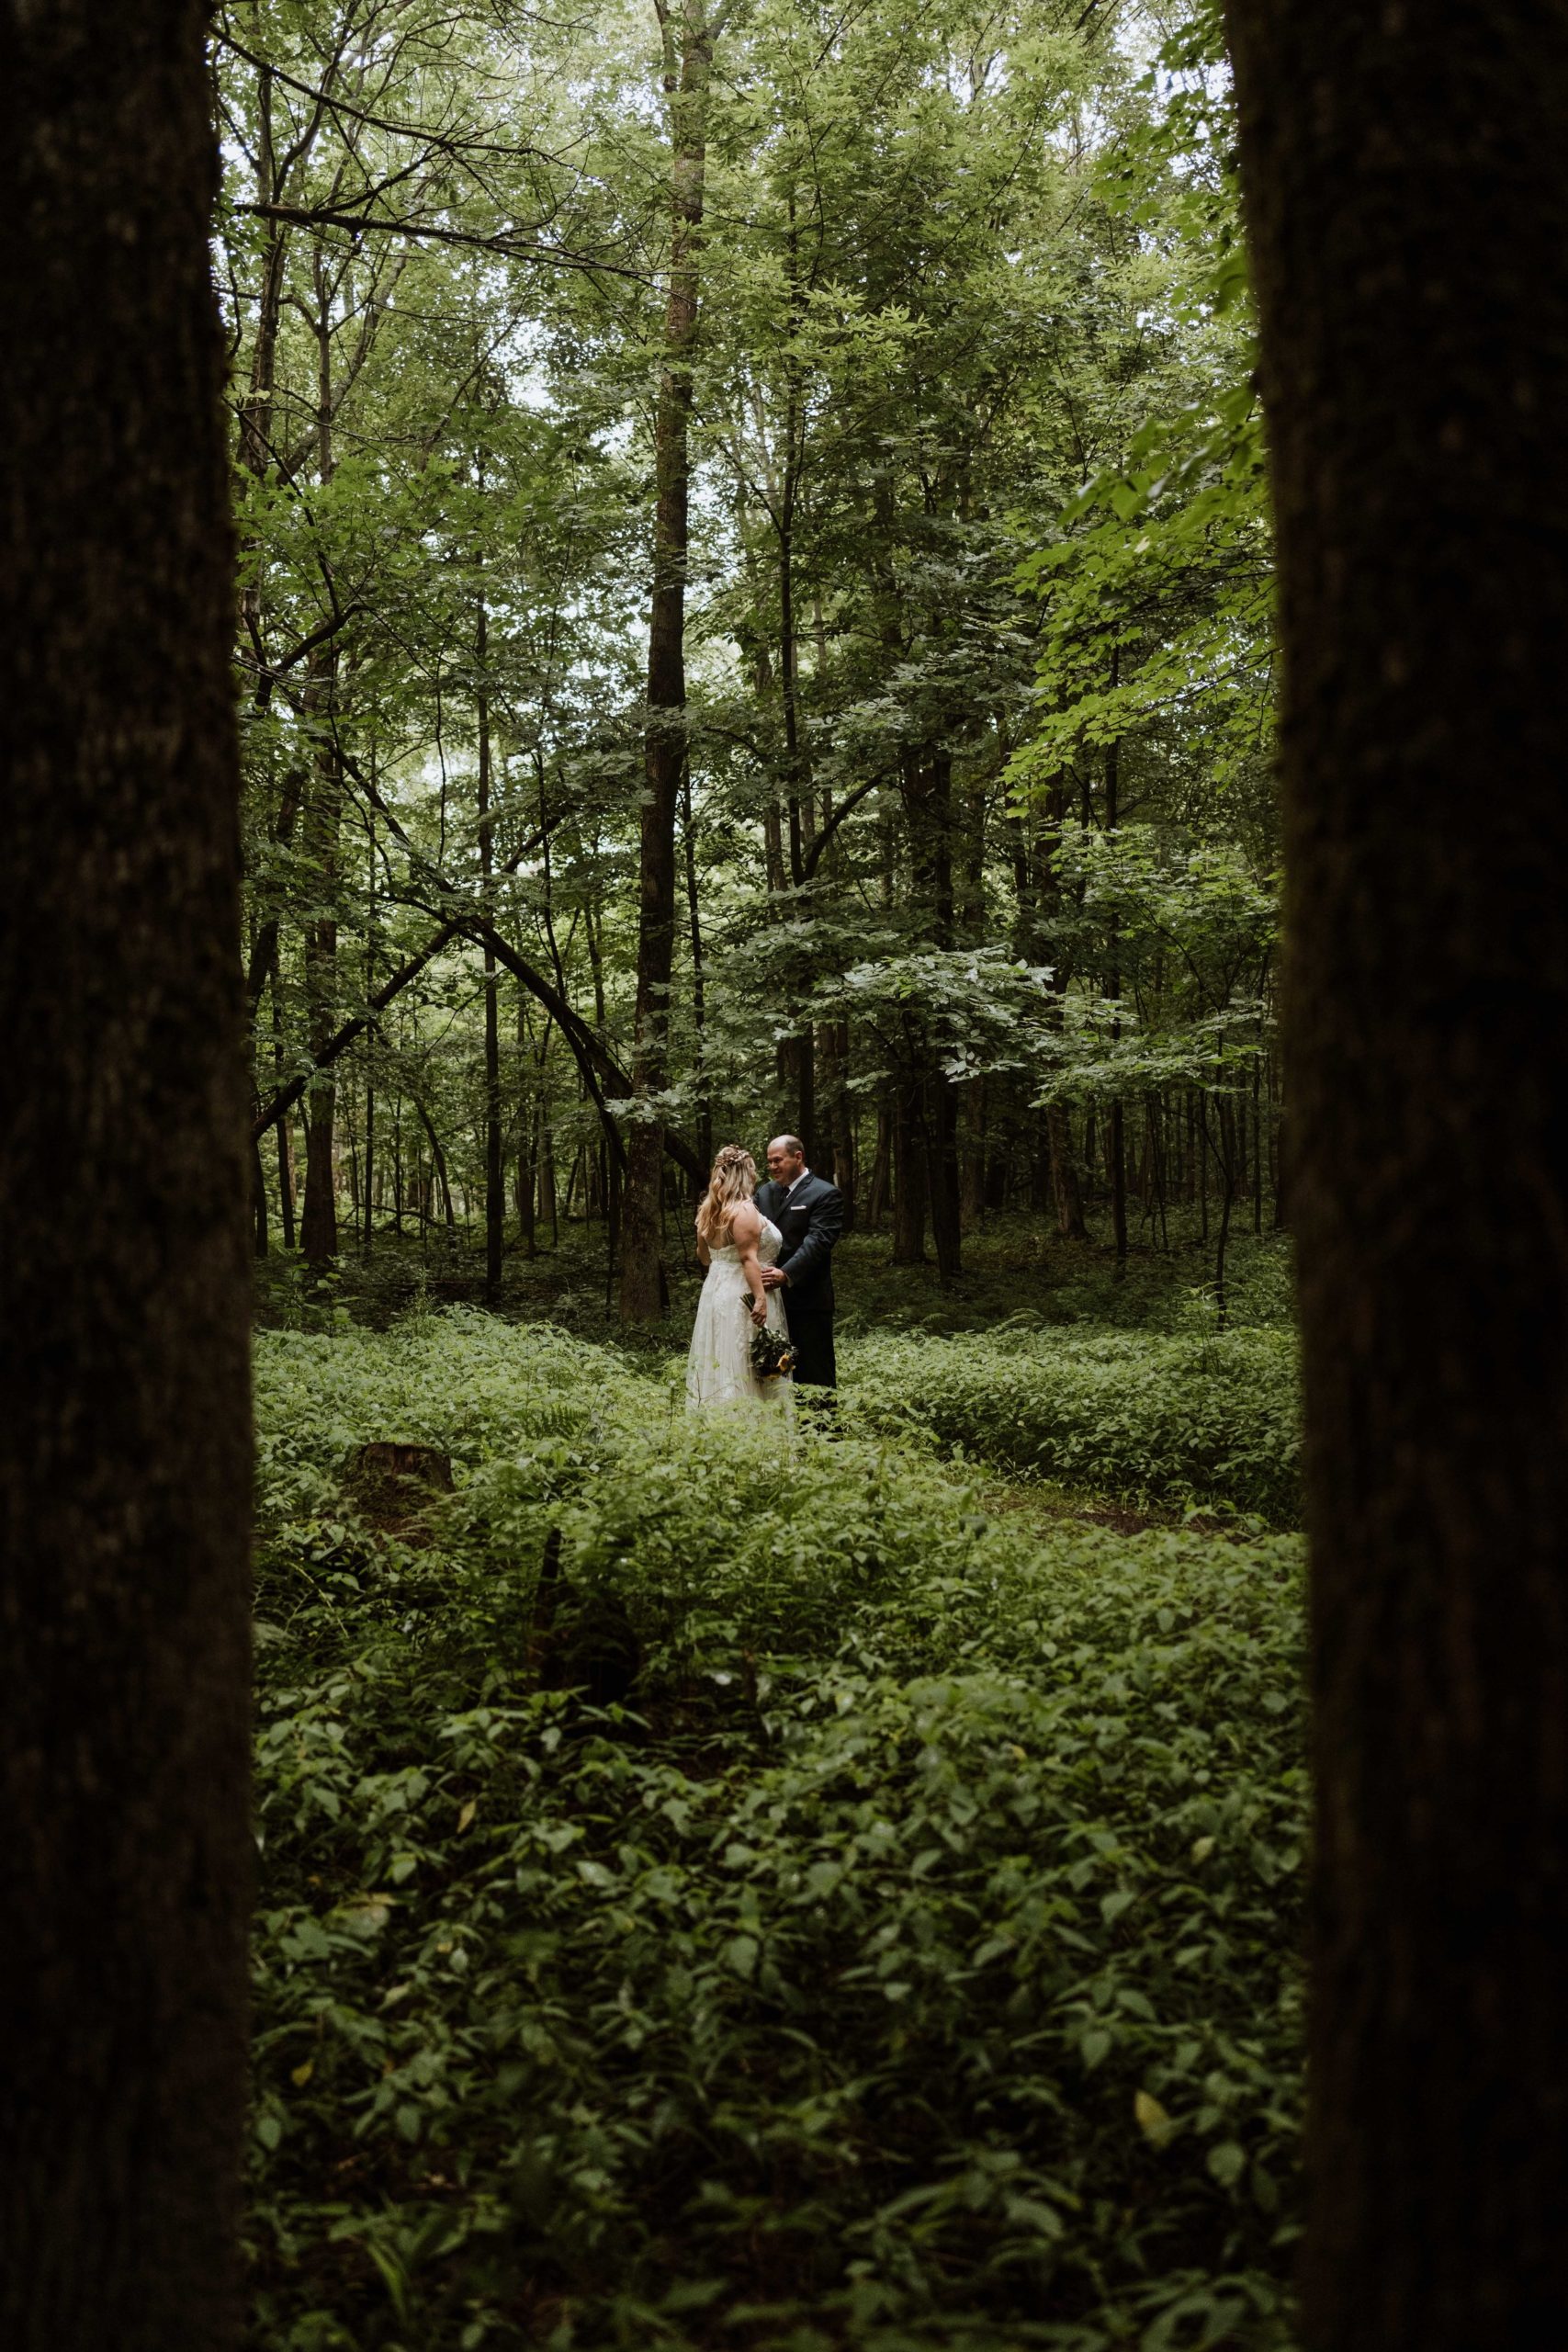 An eloping couple enjoying a few moments of privacy out on a forest trail.